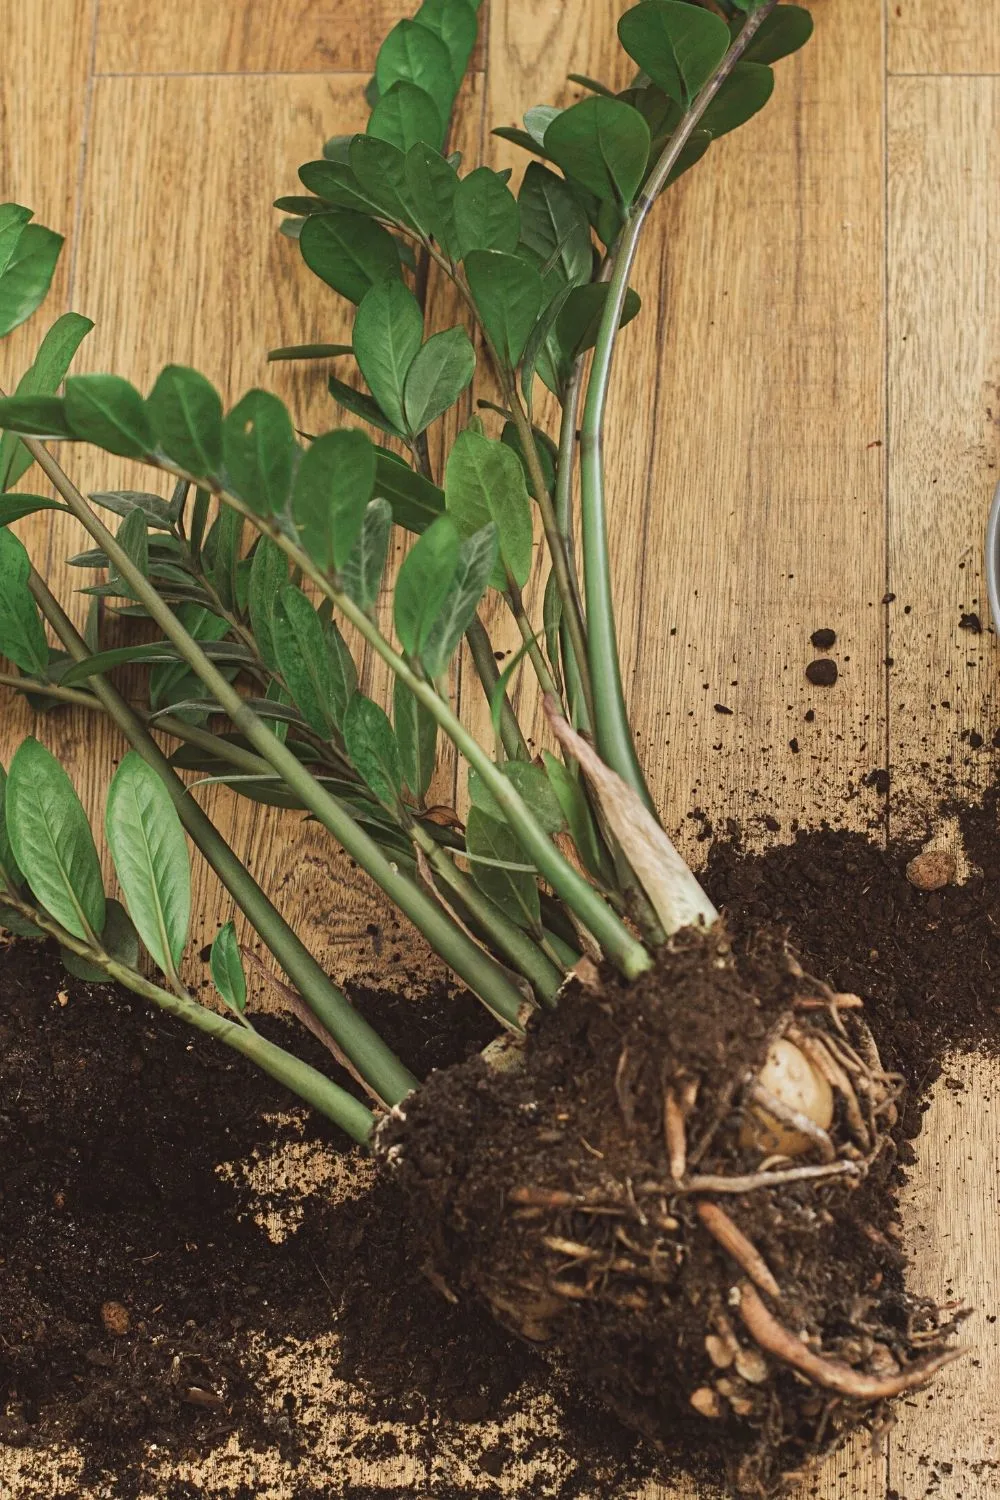 The first step to getting rid of root rot in your ZZ plant is to remove it from its pot, ridding as much of the soil